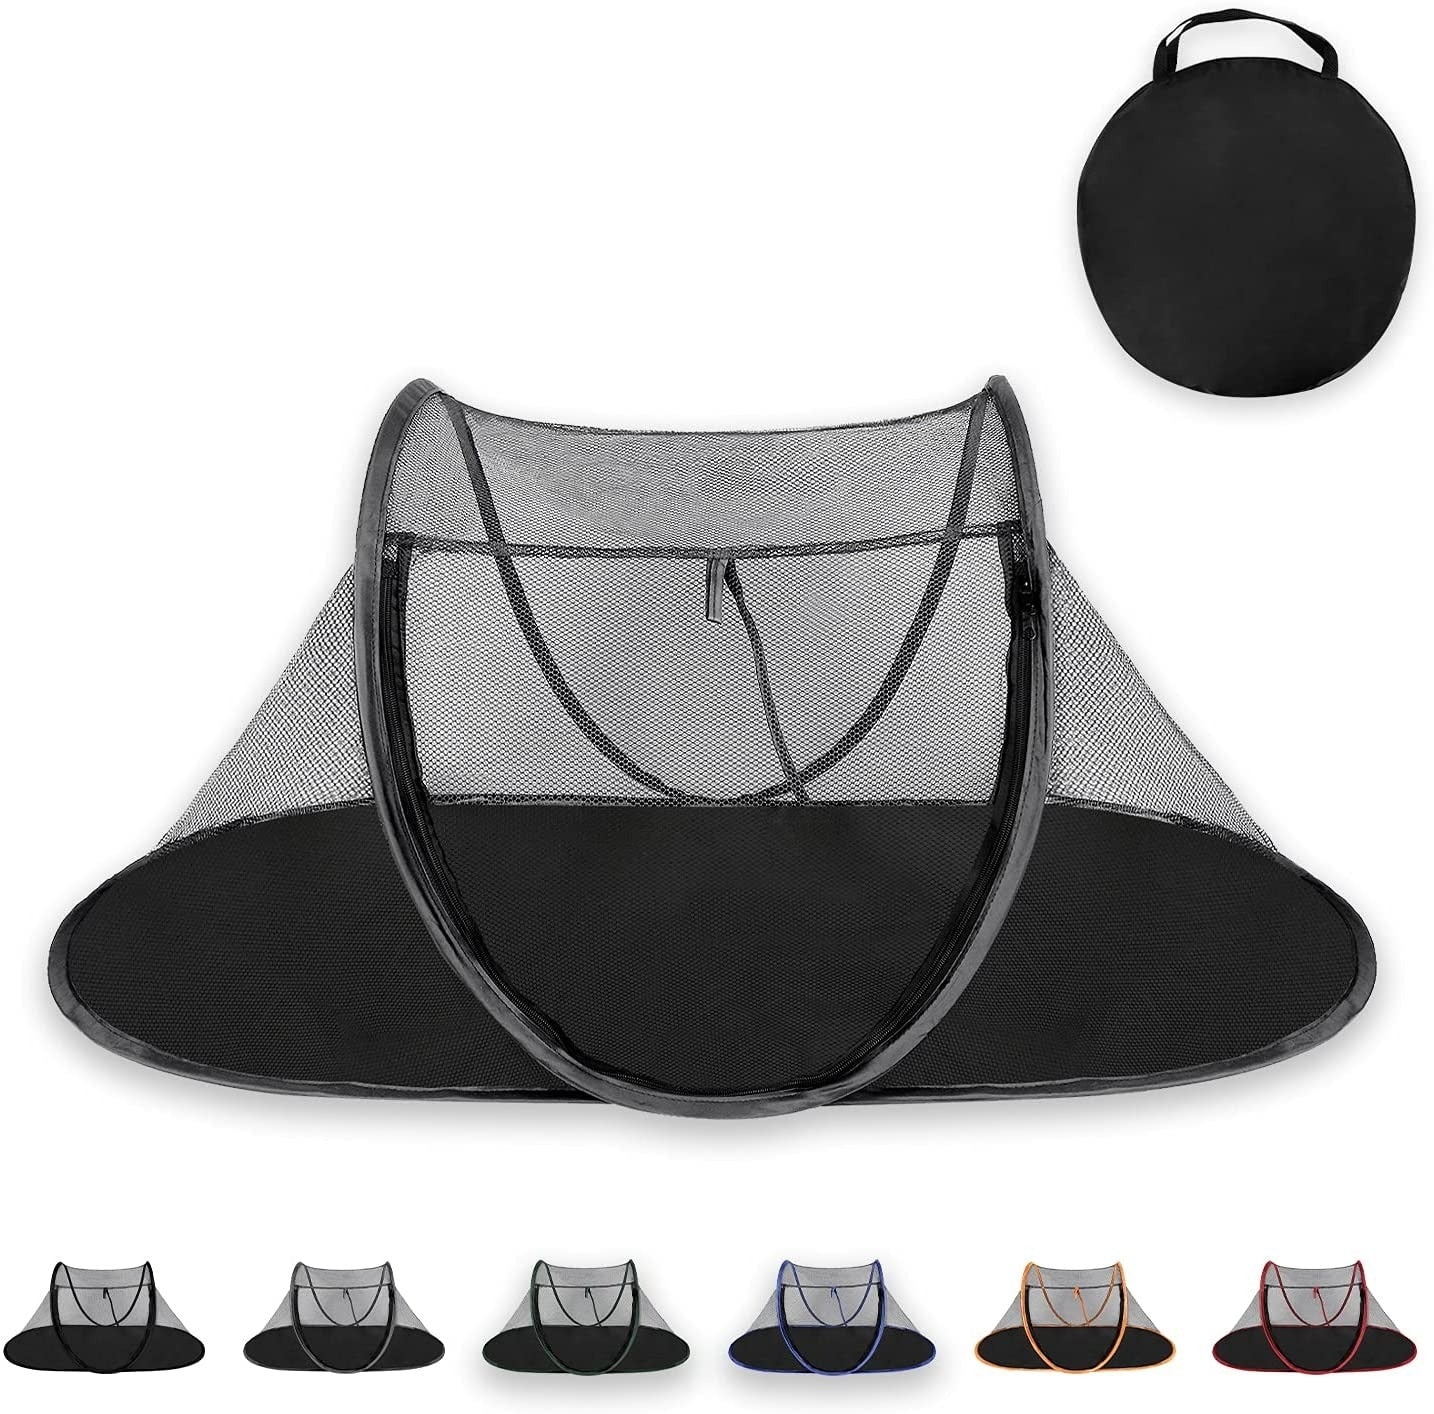 Portable Folding Puppy Tent House Outdoor Kitten Fence for pet